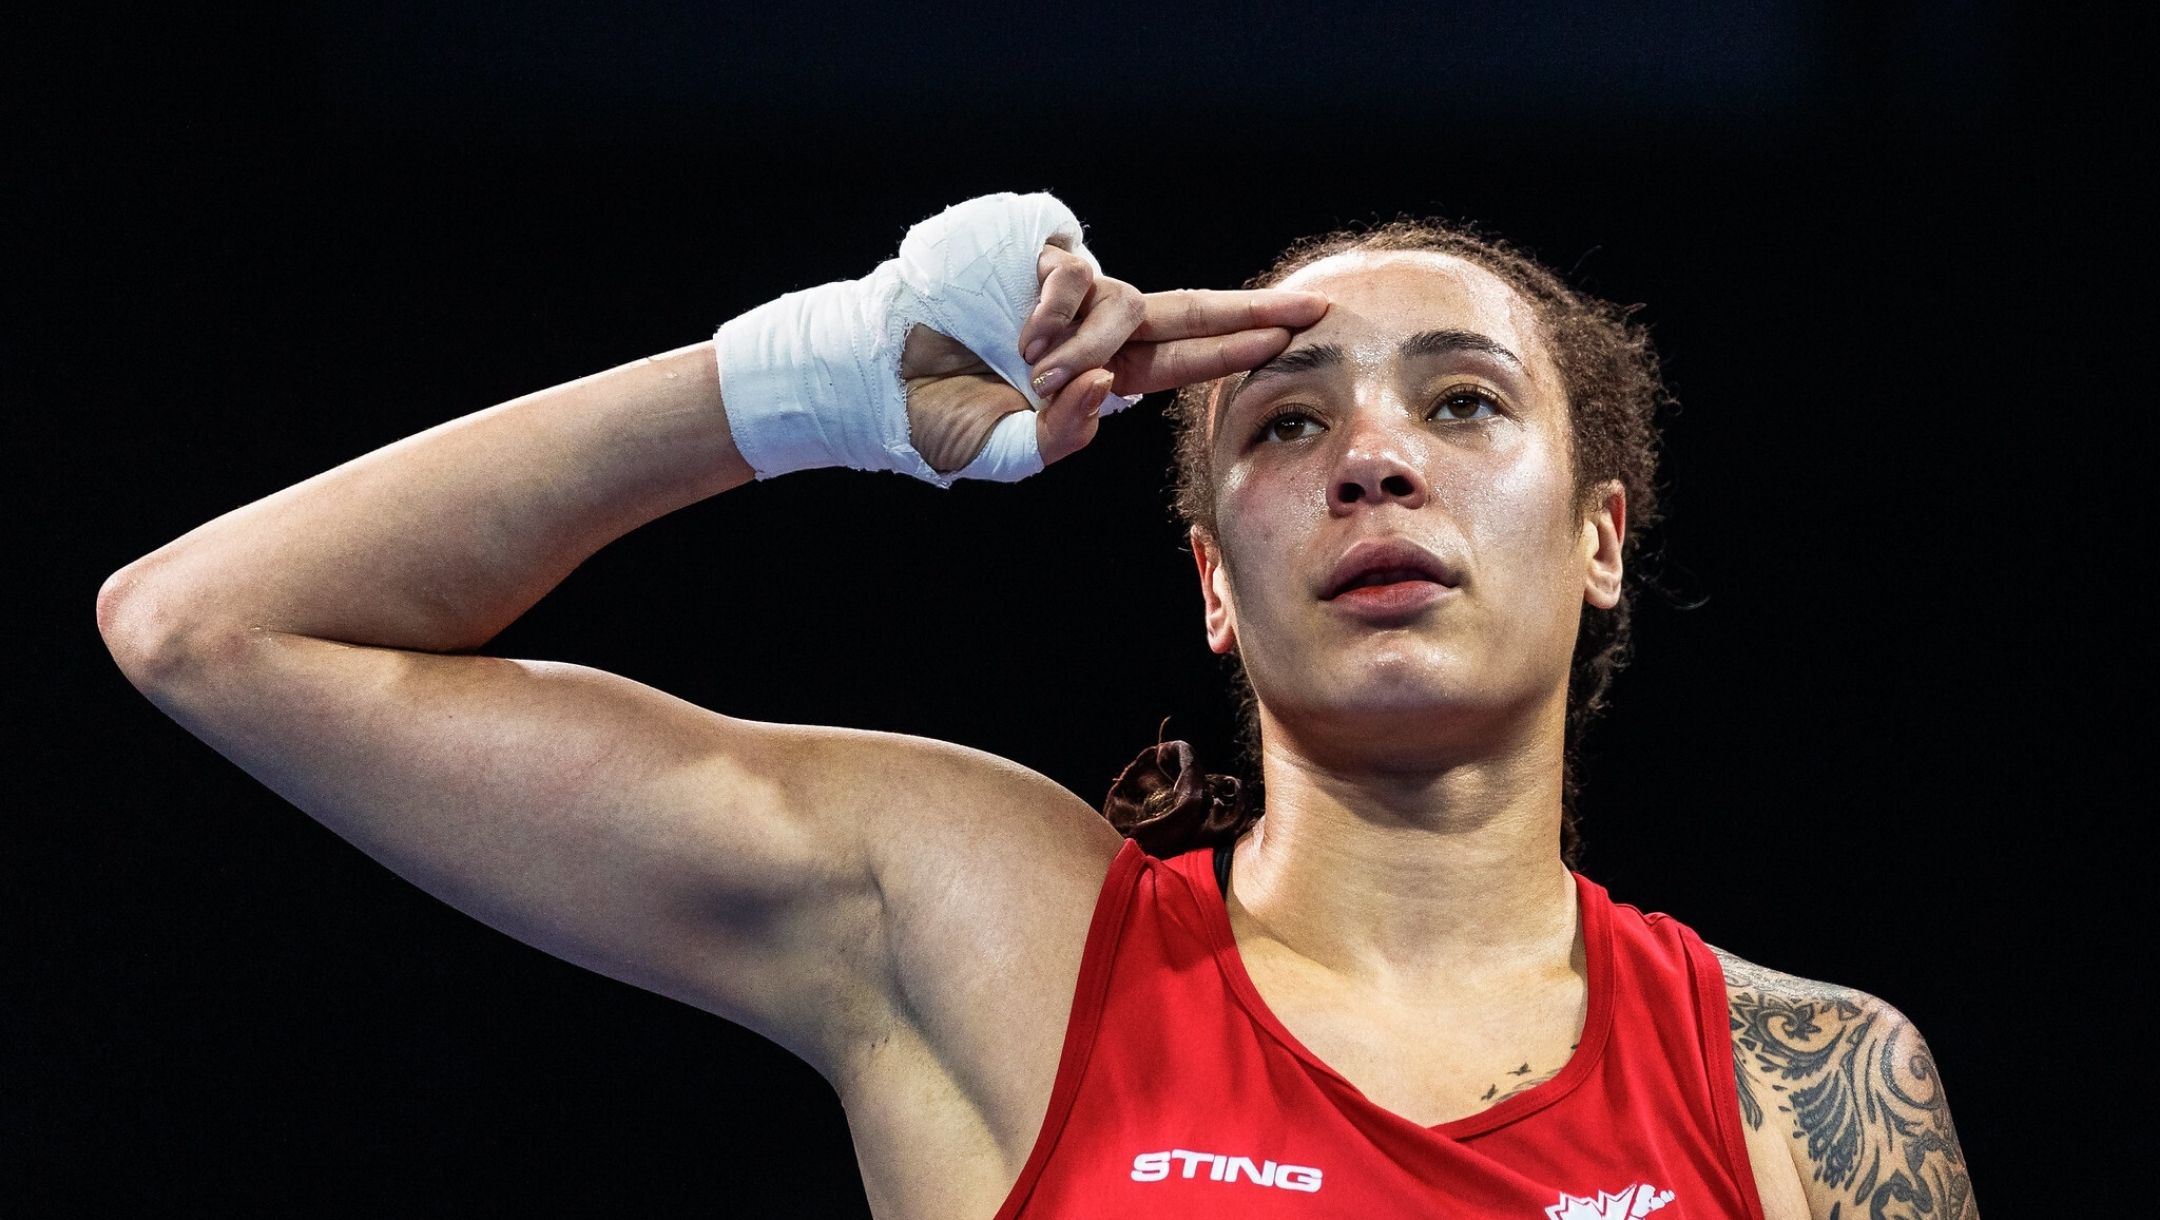 Thibeault and Cavanagh to fight for gold at women's boxing worlds - Team  Canada - Official Olympic Team Website